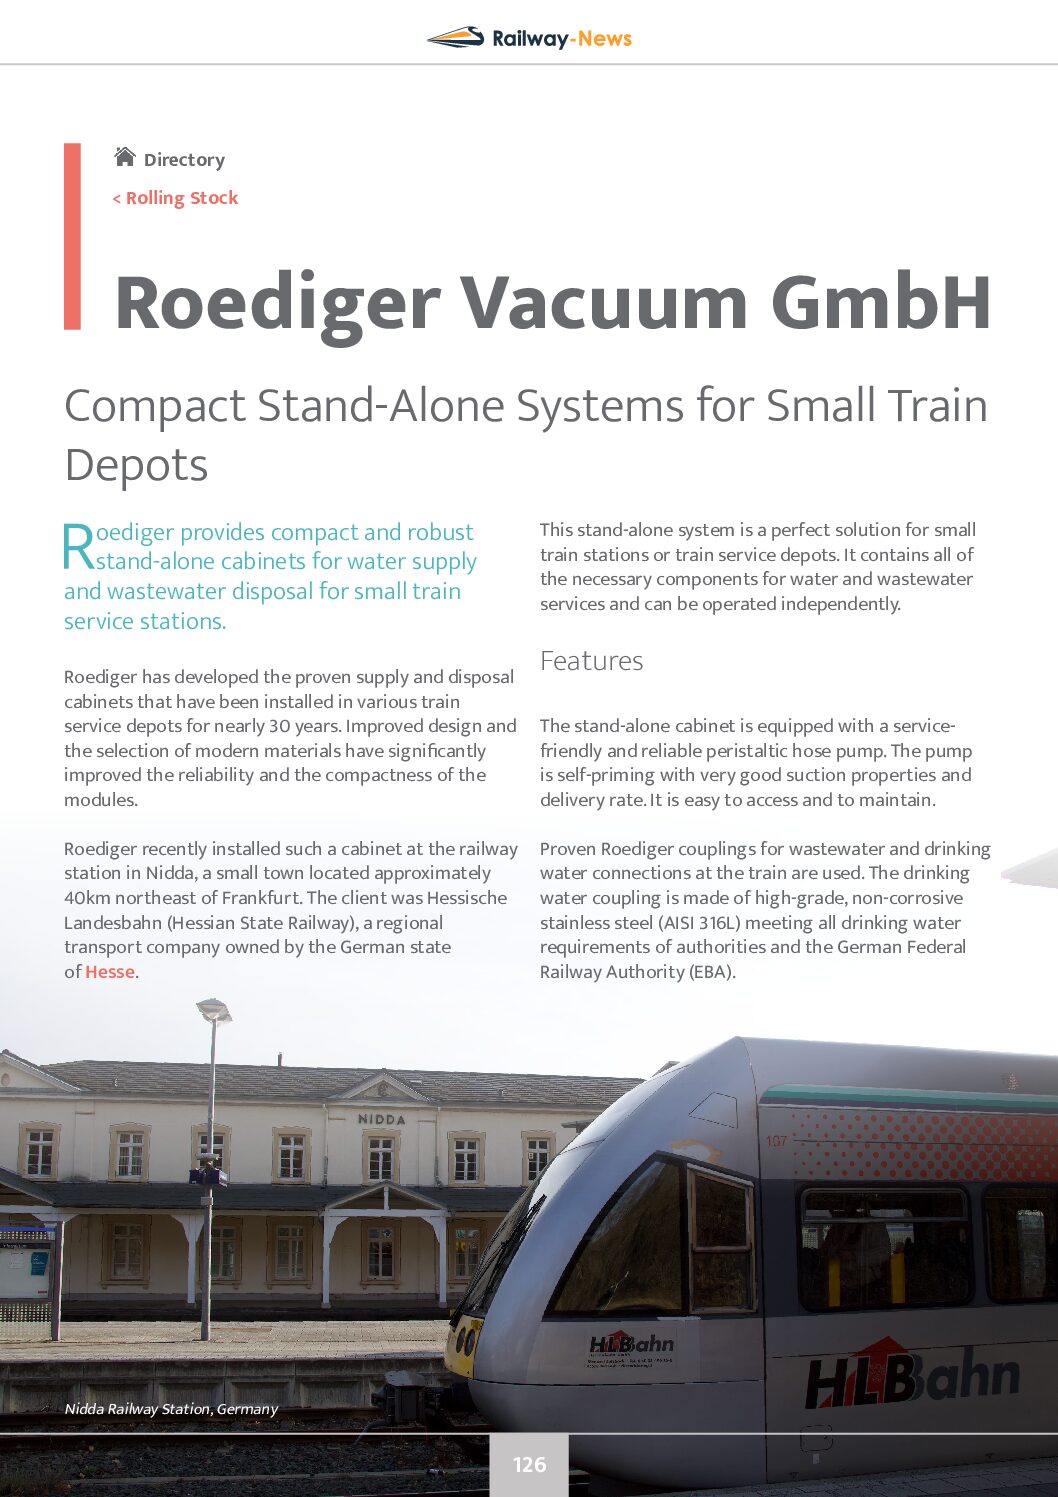 Compact Stand-Alone Systems for Small Train Depots